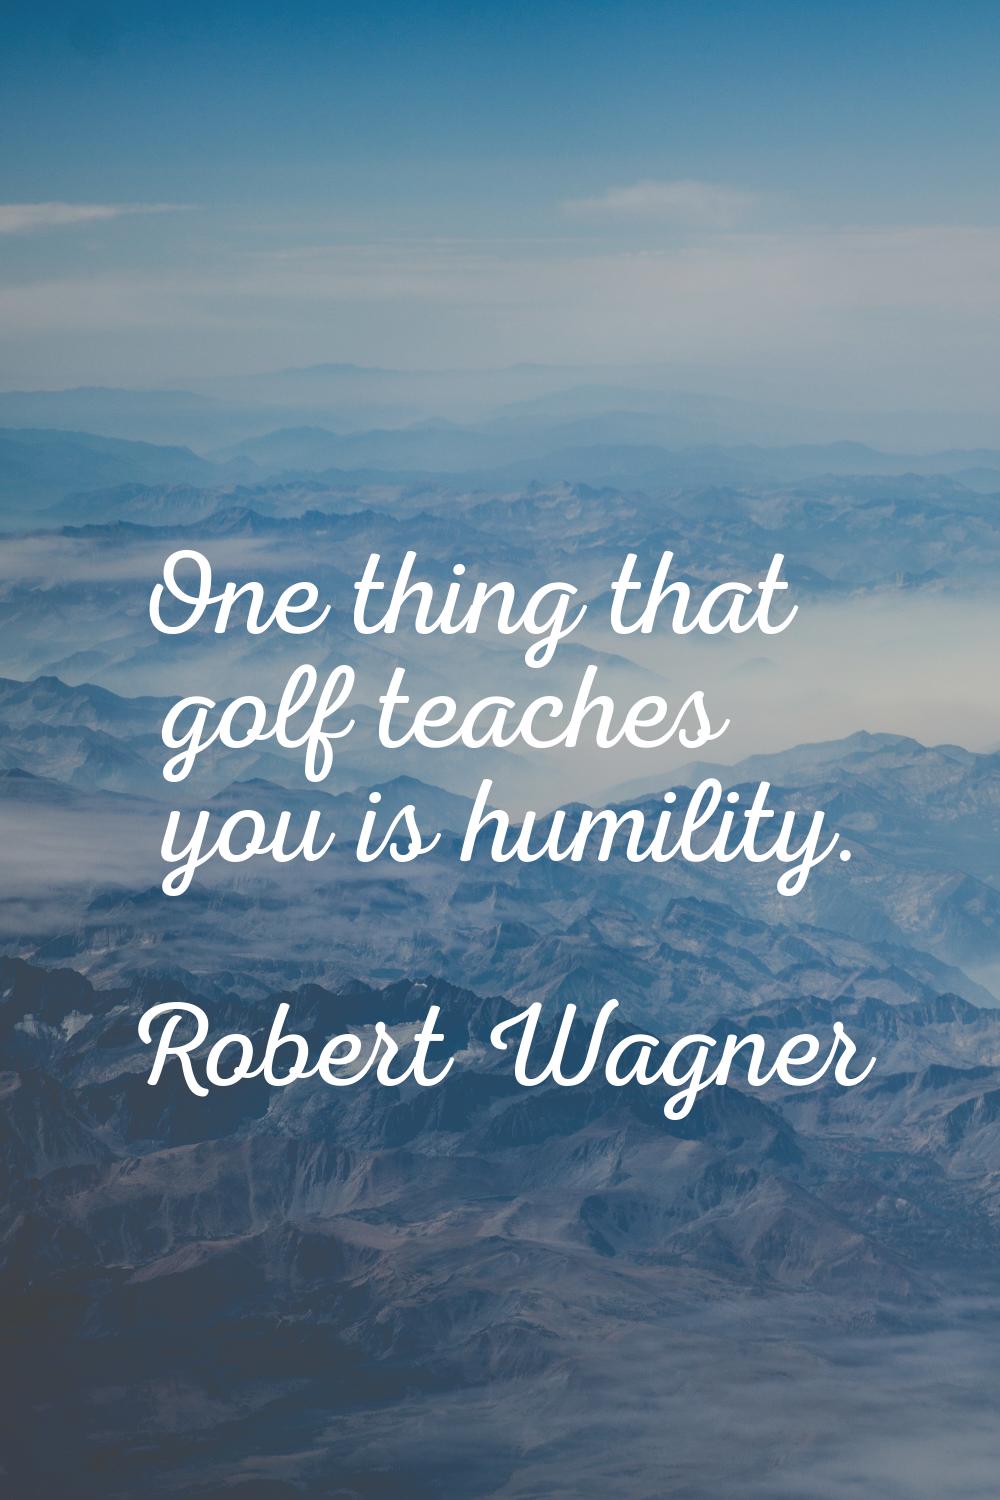 One thing that golf teaches you is humility.